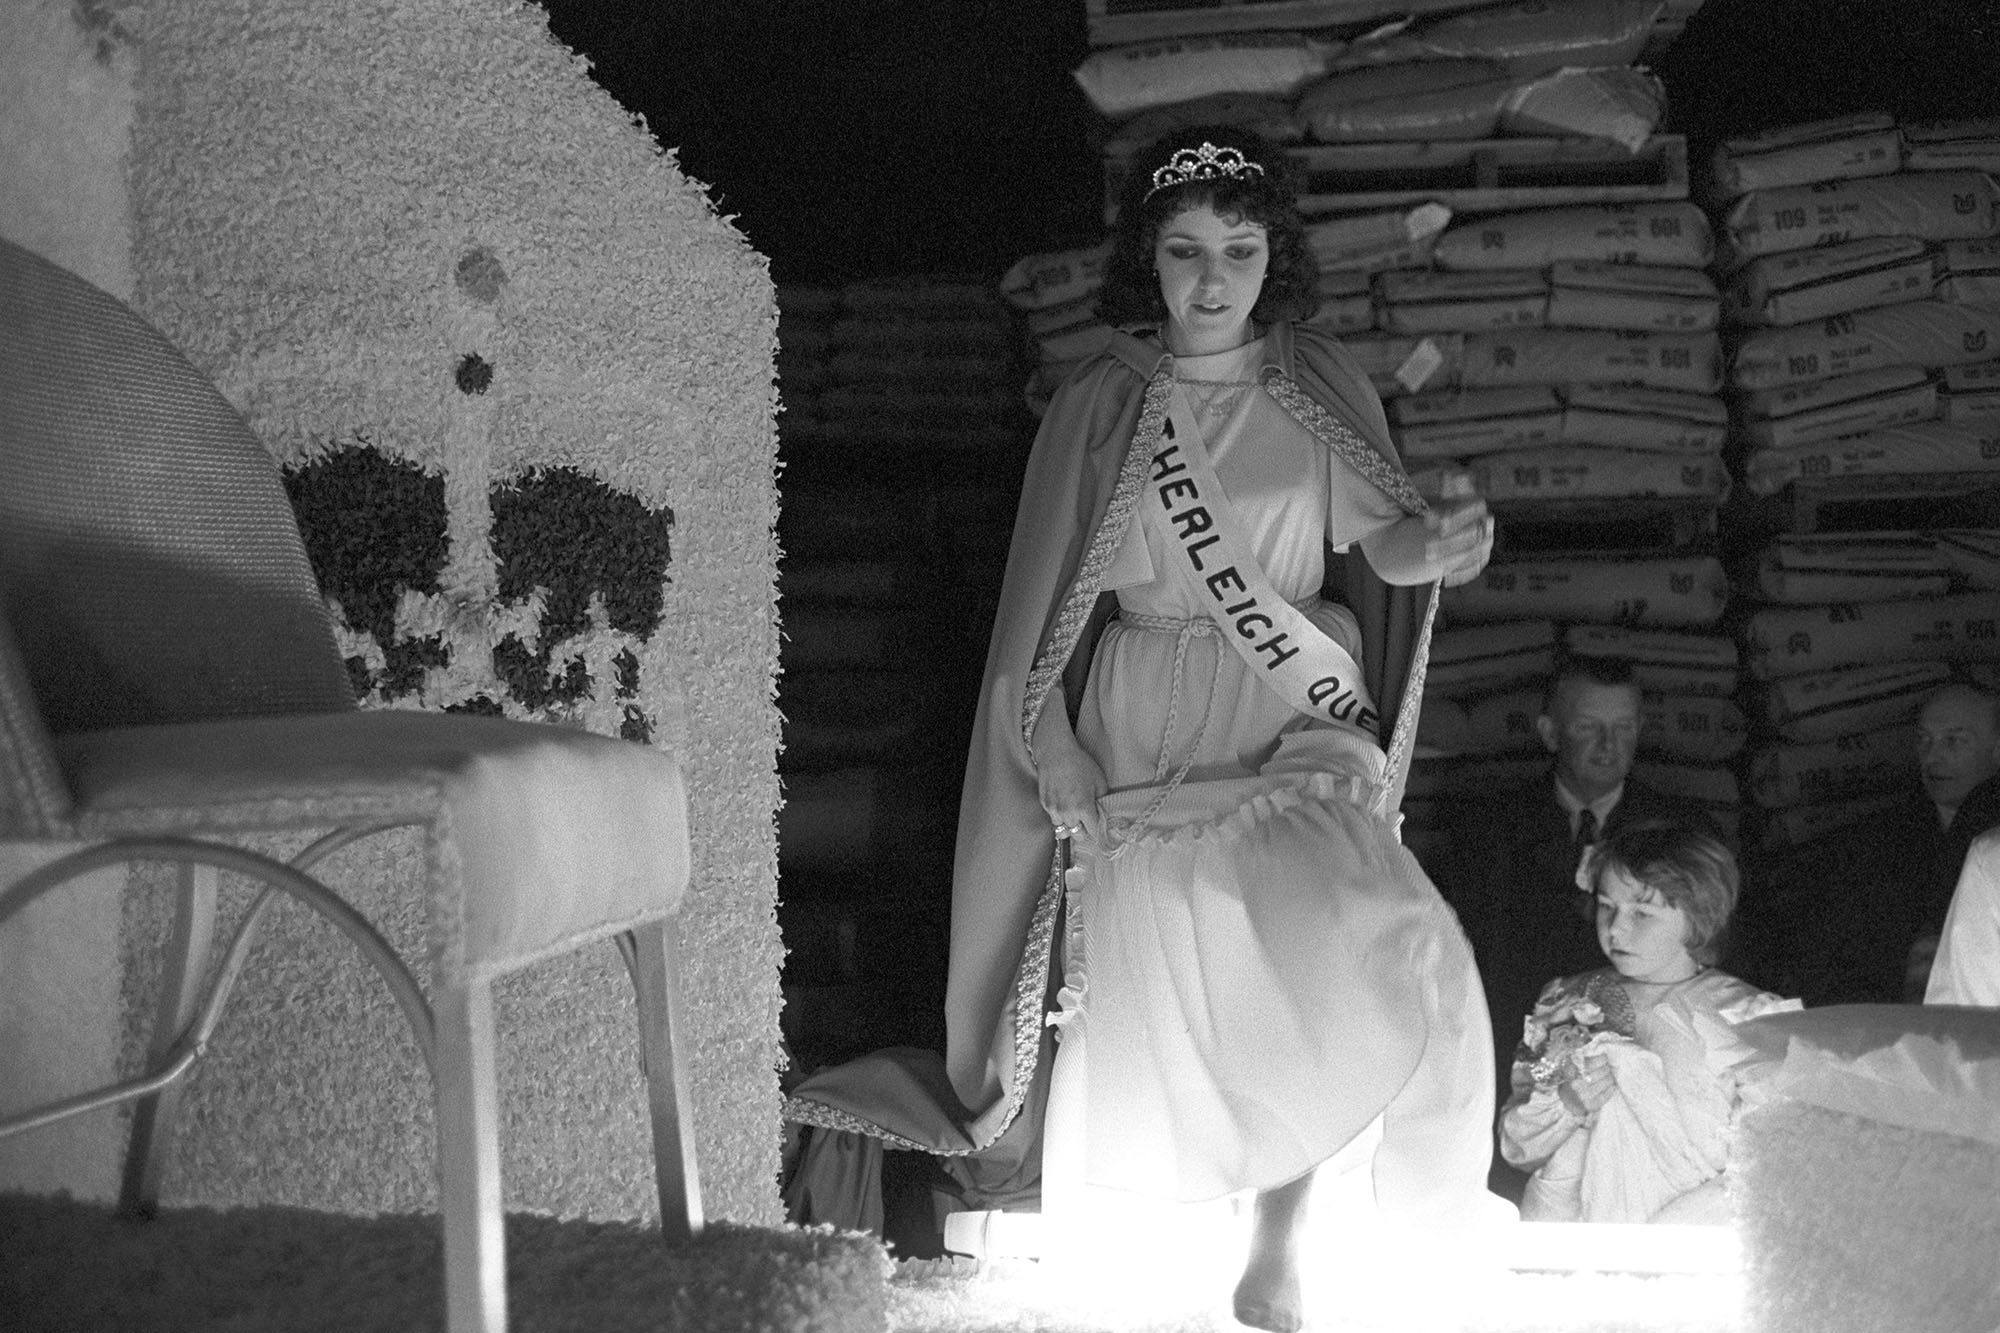 Carnival Queen stepping up to her throne at night. 
[Cindy-Jane Dillon, Hatherleigh Carnival Queen stepping up to her throne on a carnival float at Hatherleigh Carnival at night.]